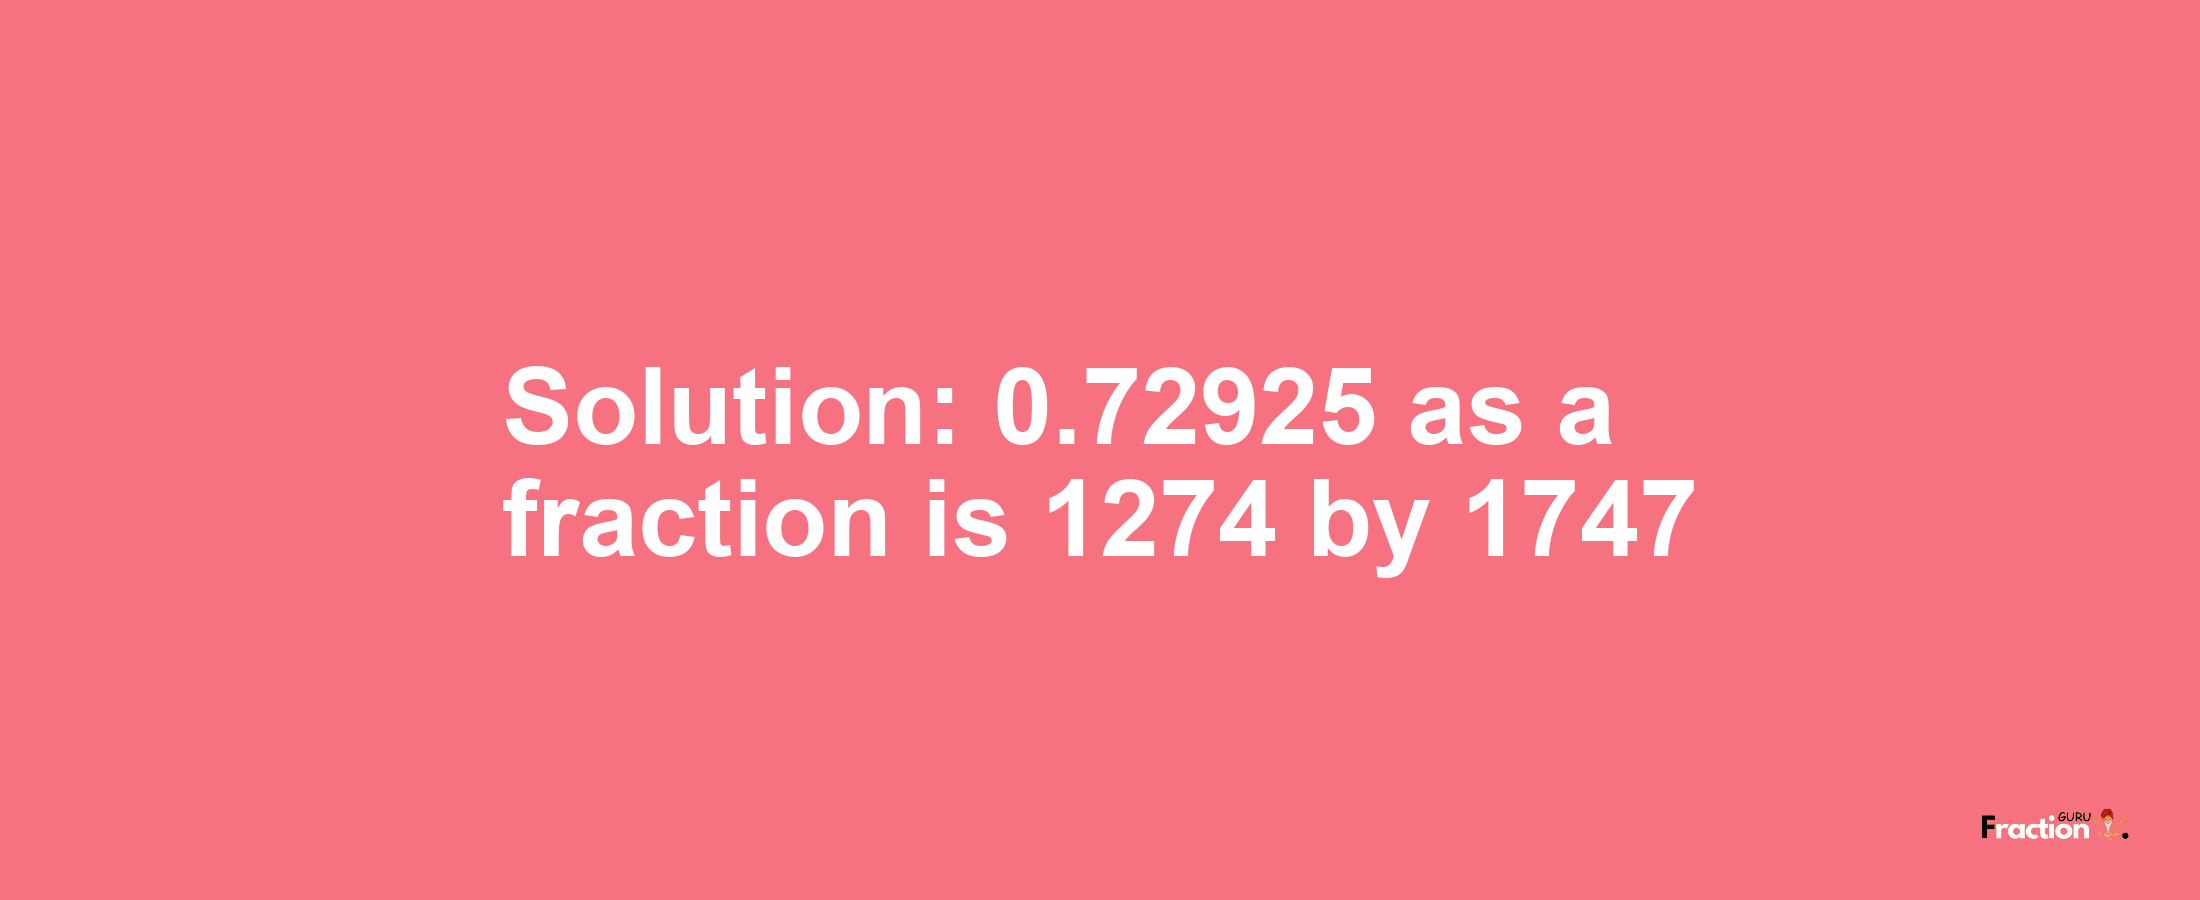 Solution:0.72925 as a fraction is 1274/1747